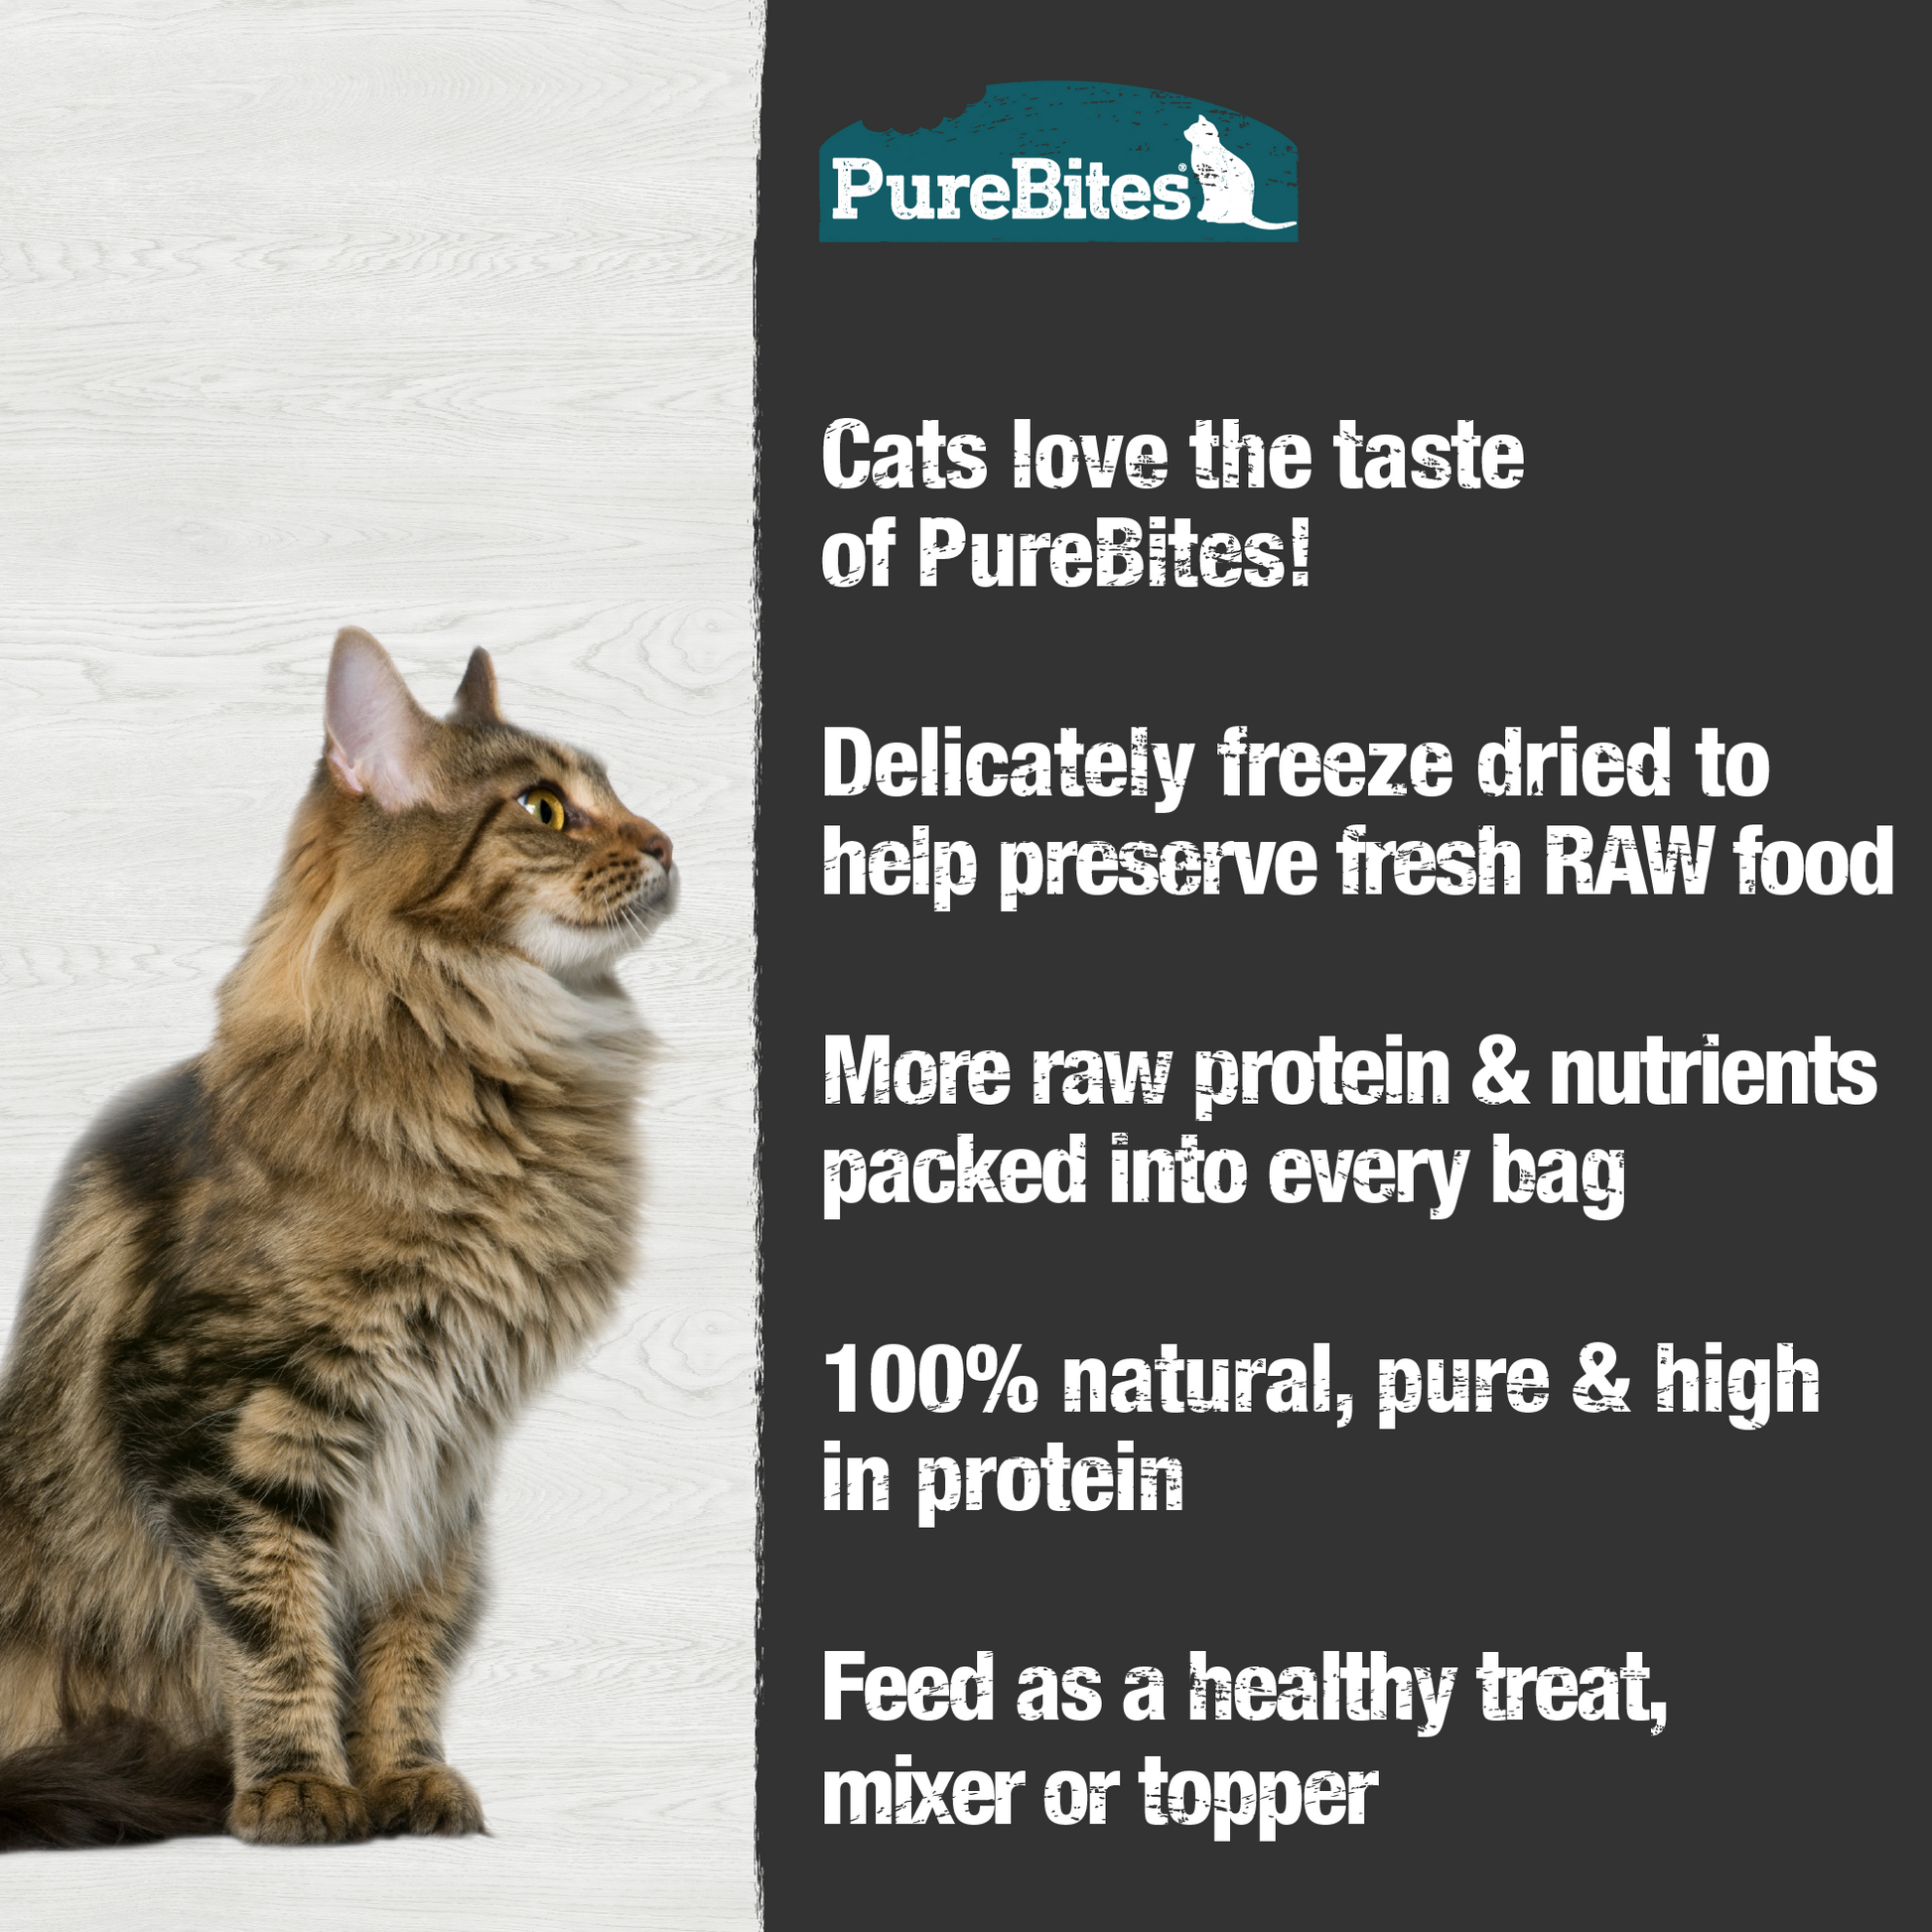 Made fresh & pure means more RAW protein and nutrients packed into every bag. Our minnows are freeze dried to help preserve their RAW taste, and nutrition, and mirror a cat’s ancestral diet